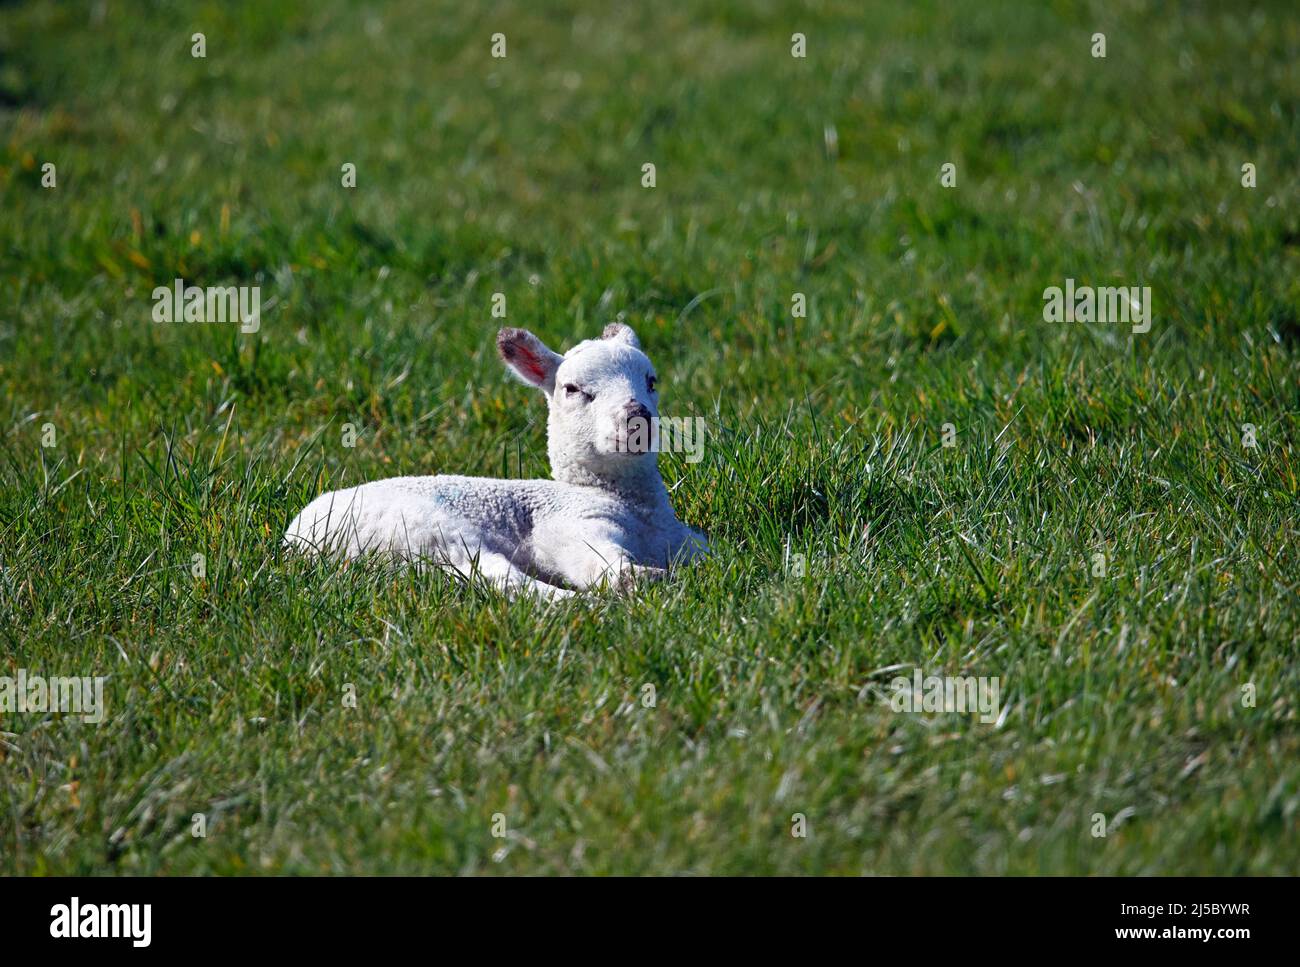 New born lambs in a grassy meadow Stock Photo